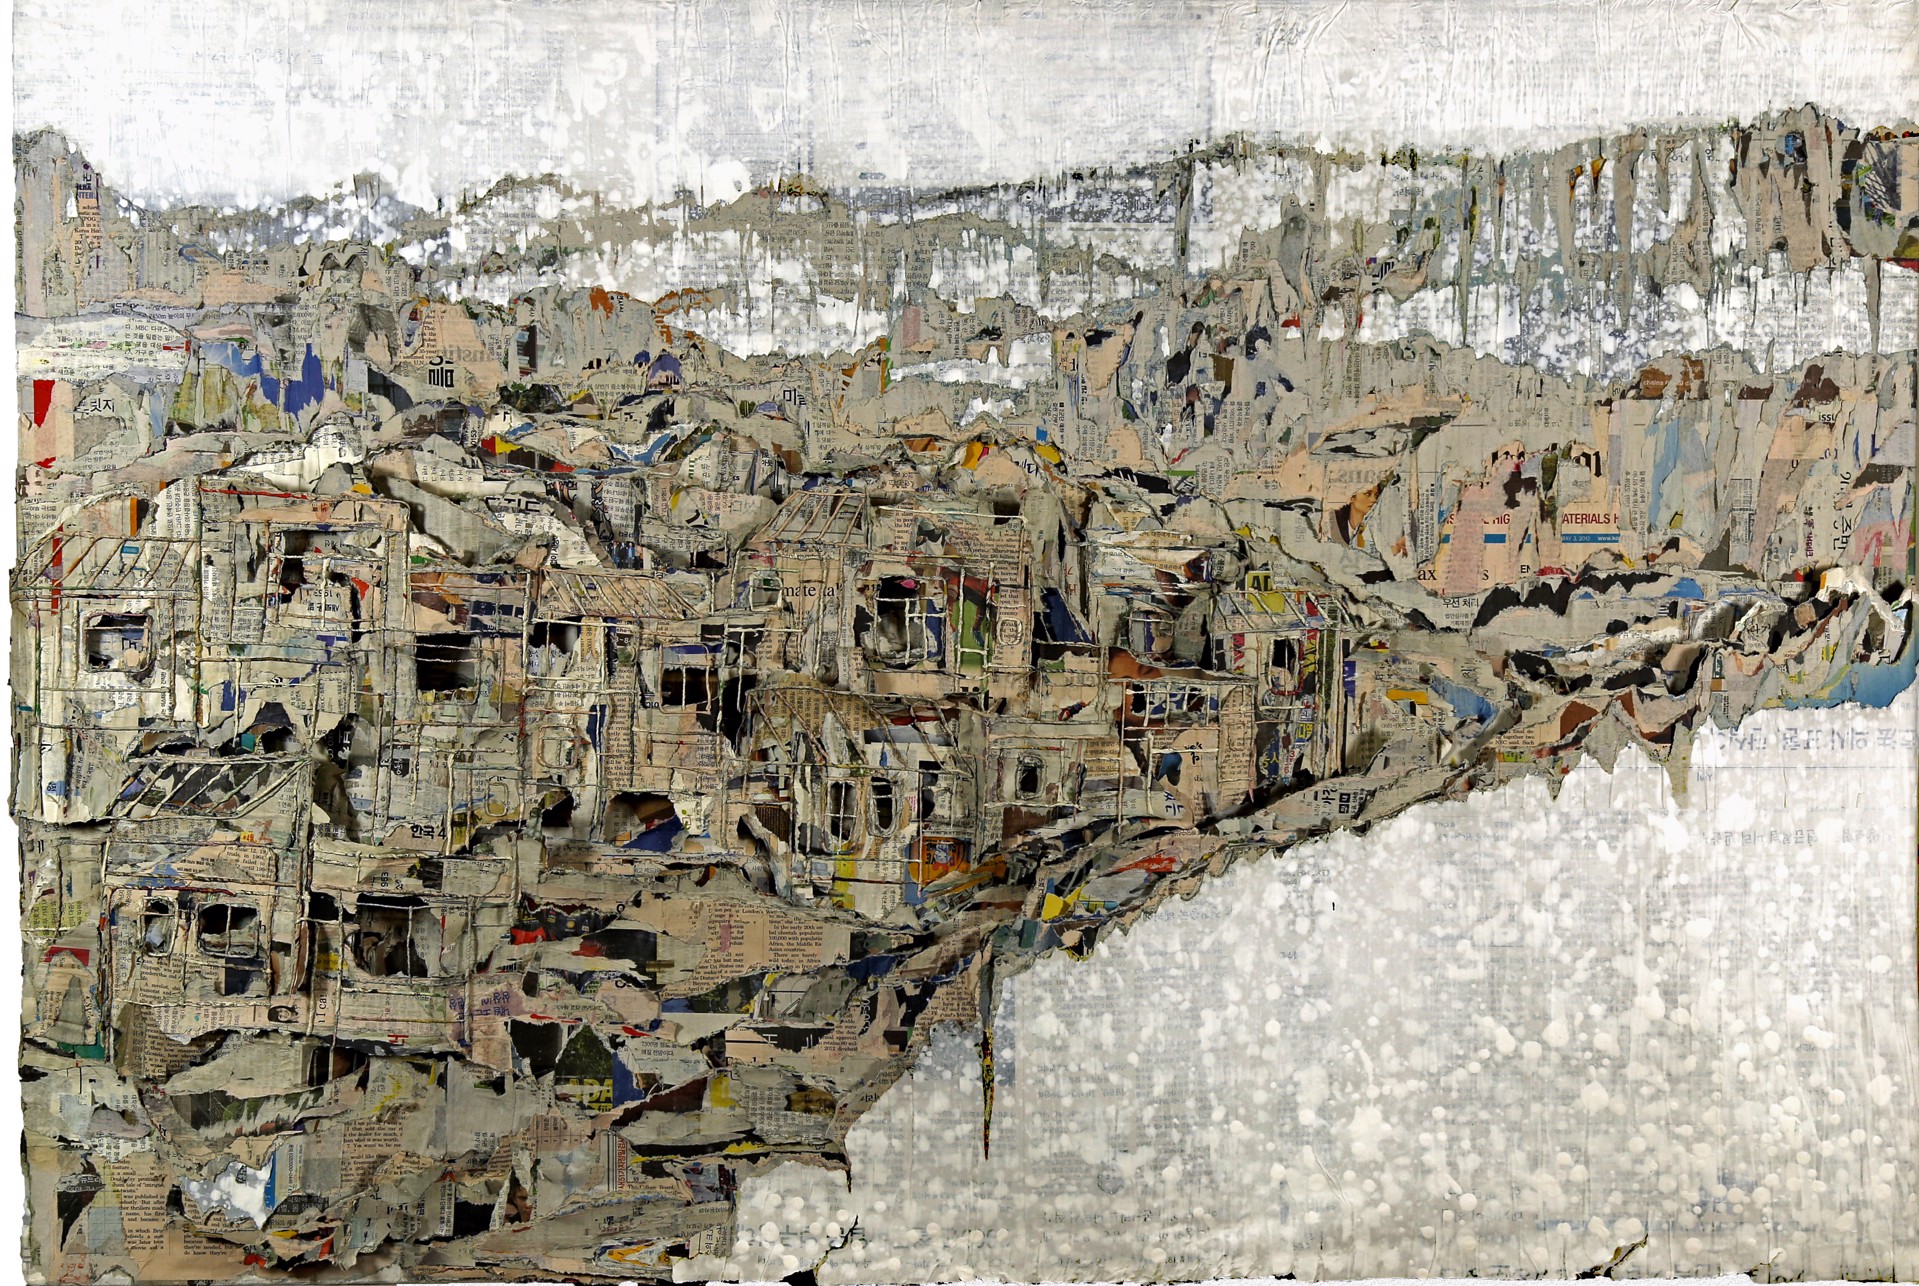 Panorama of the Village by Yeji Moon